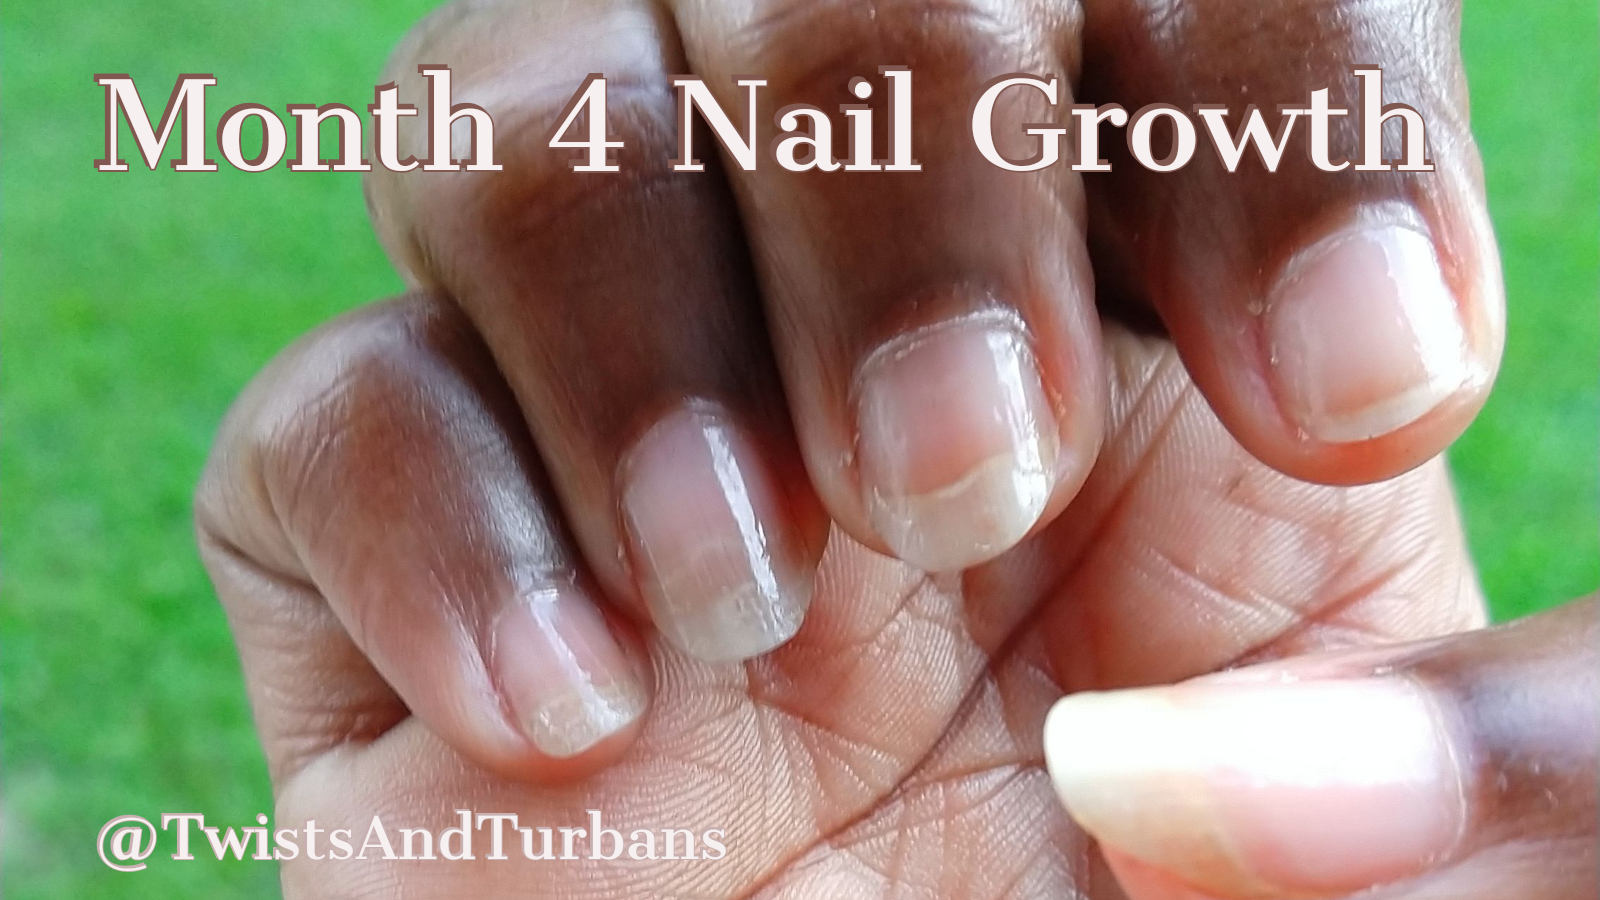 Nail Growth Goals Update | Month 4 - Twists & Turbans